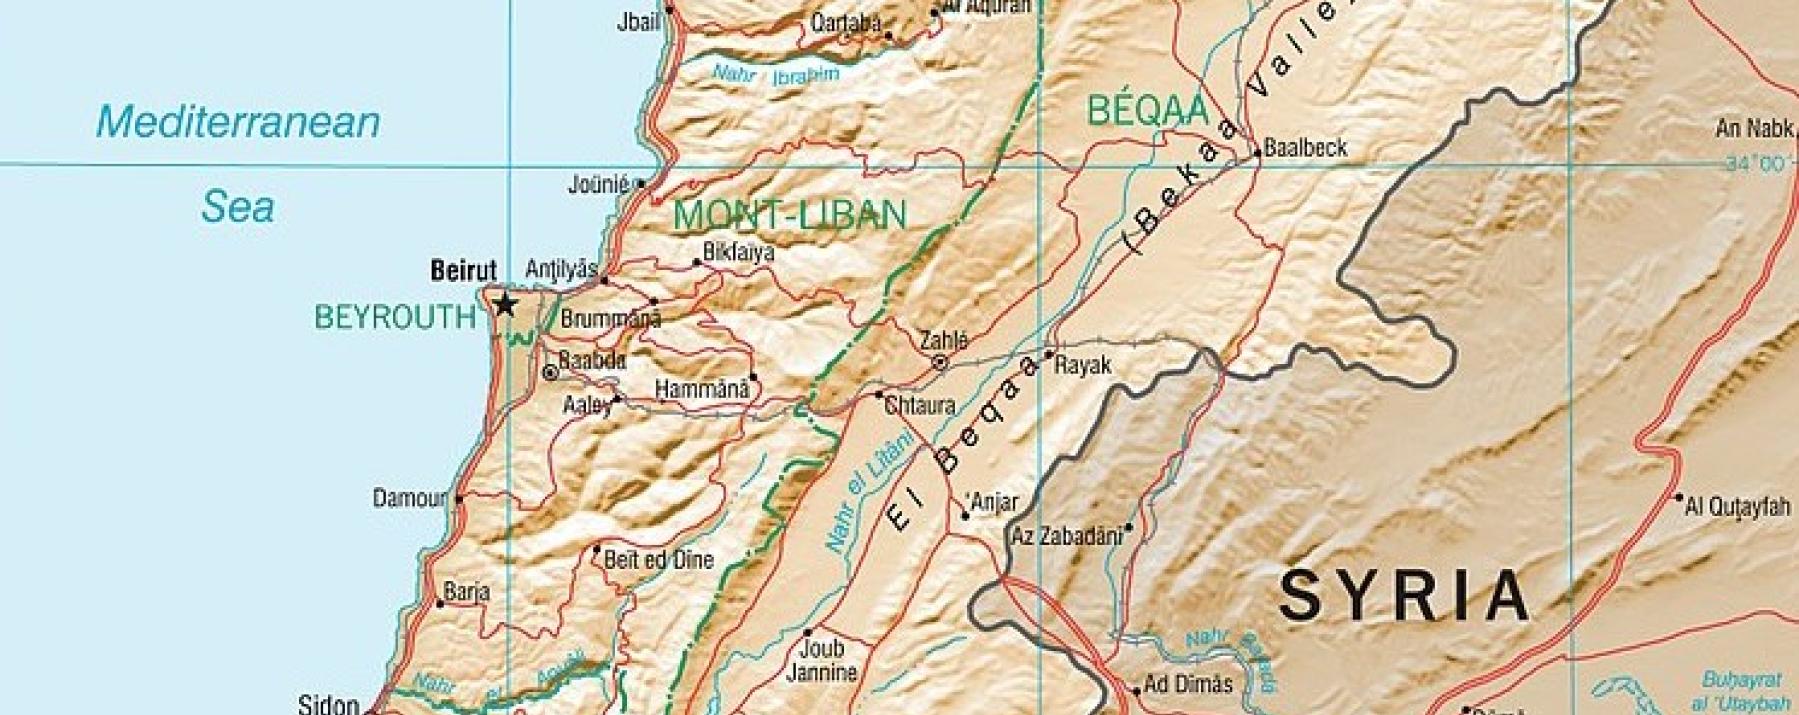 map of Lebanon and Syria